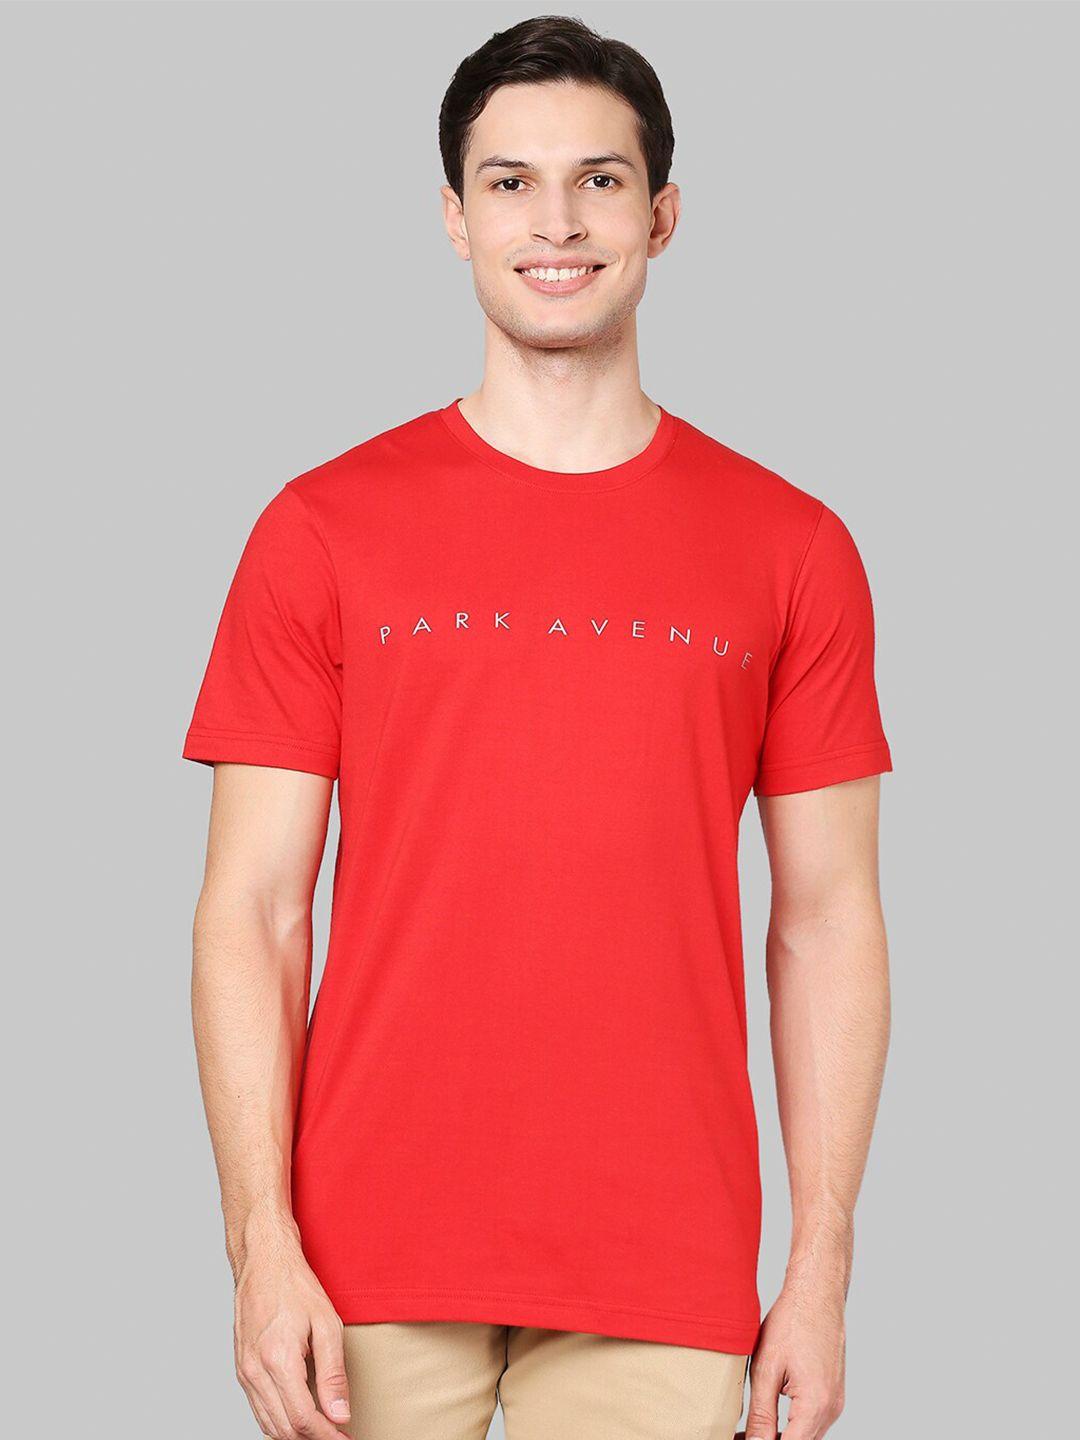 park avenue men red typography printed slim fit t-shirt